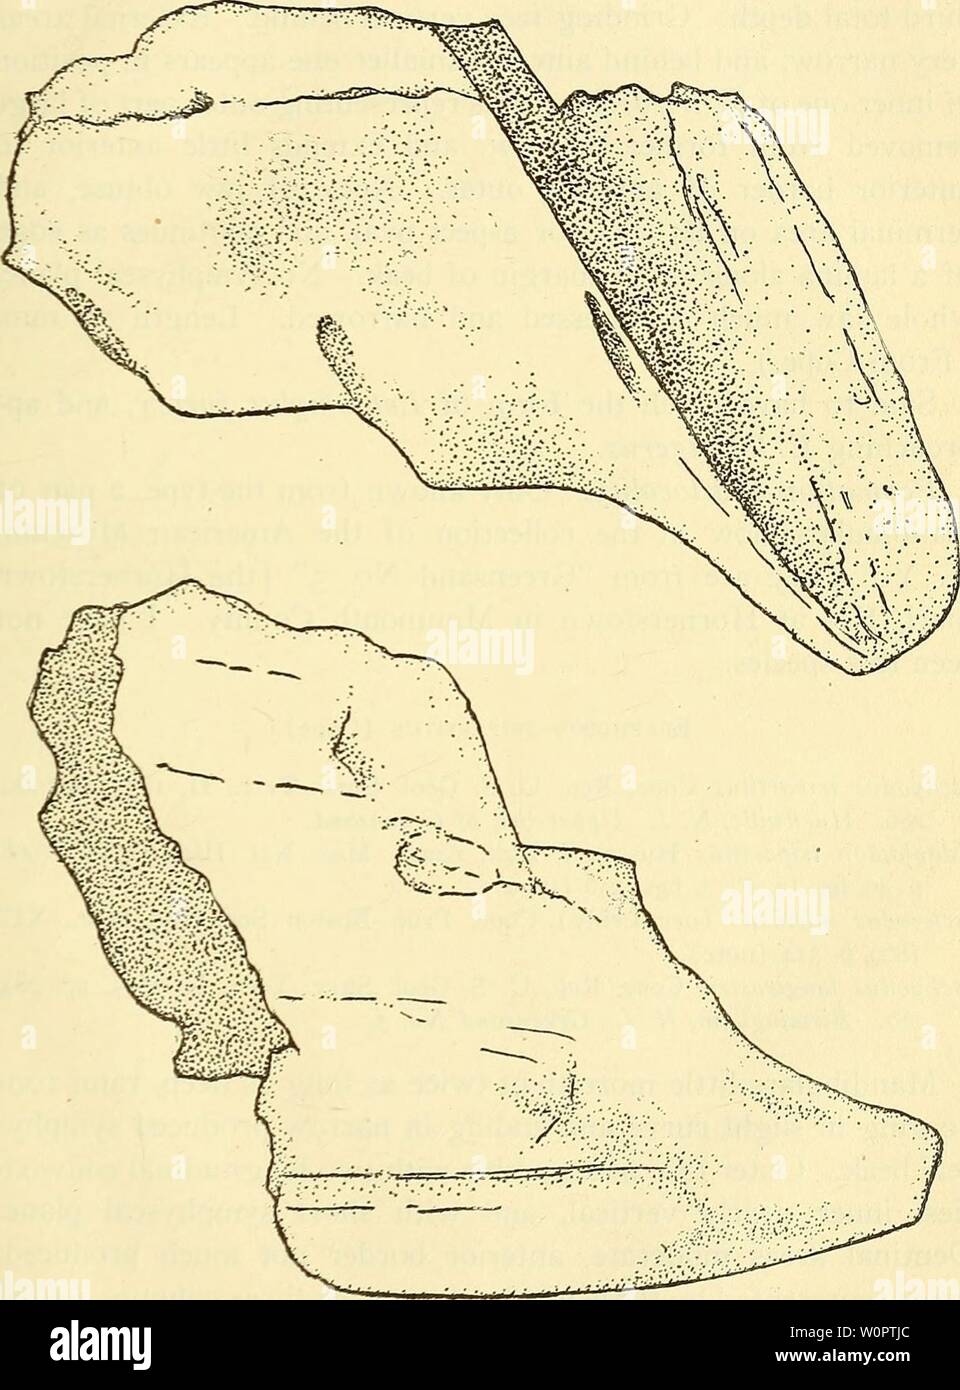 Archive image from page 136 of A description of the fossil. A description of the fossil fish remains of the Cretaceous, Eocene and Miocene formations of New Jersey descriptionoffos00fowl Year: 1911  HOLOCEPHAU. in Edaphodon stenobryus (Cope). Ischyodus stenobryus Cope, Rep. U. S. Geol. Surv. Terr., II, 1875, pp. 284, 285. Hornerstown, N. J., Greensand No. 5. Edaphodon stenobryus Hussakof, Bull. Amer. Mus. N. H., XXV, 1908, p. 39, PL 2, figs. 6-7 (types).    Fig 63.—Edaphodon stenobryus (Cope). (From Hussakof.) Stock Photo